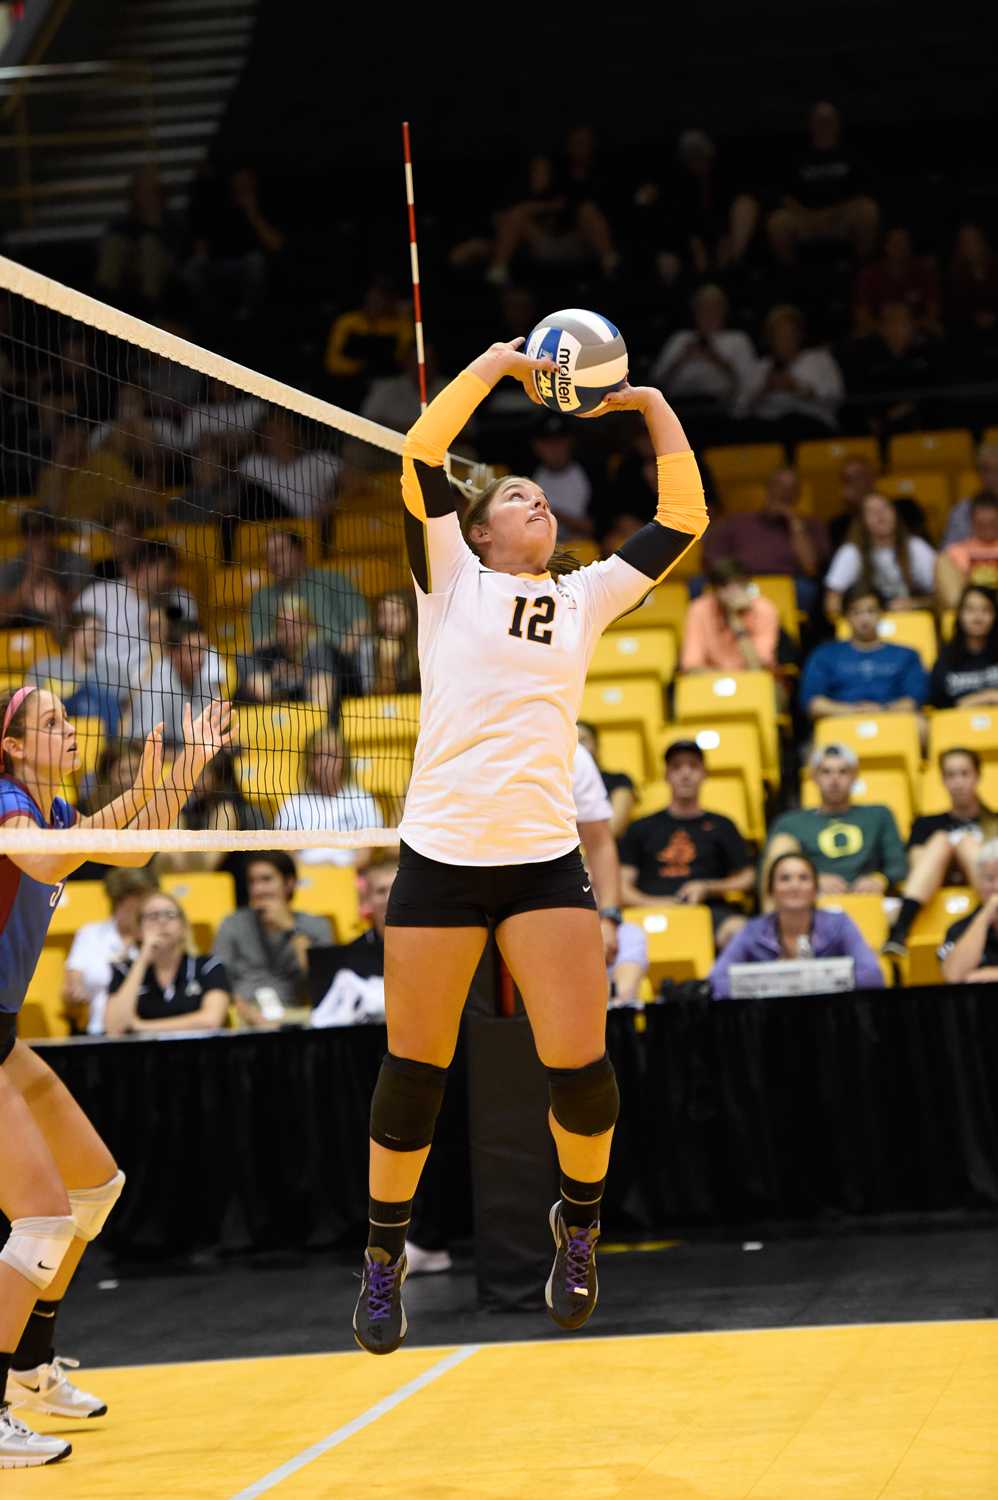 Senior setter Paige Browns impressive records during the 2014-2015 season  earned her this years Sun Belt Preseason Setter of the Year honor. Photo by Justin Perry.